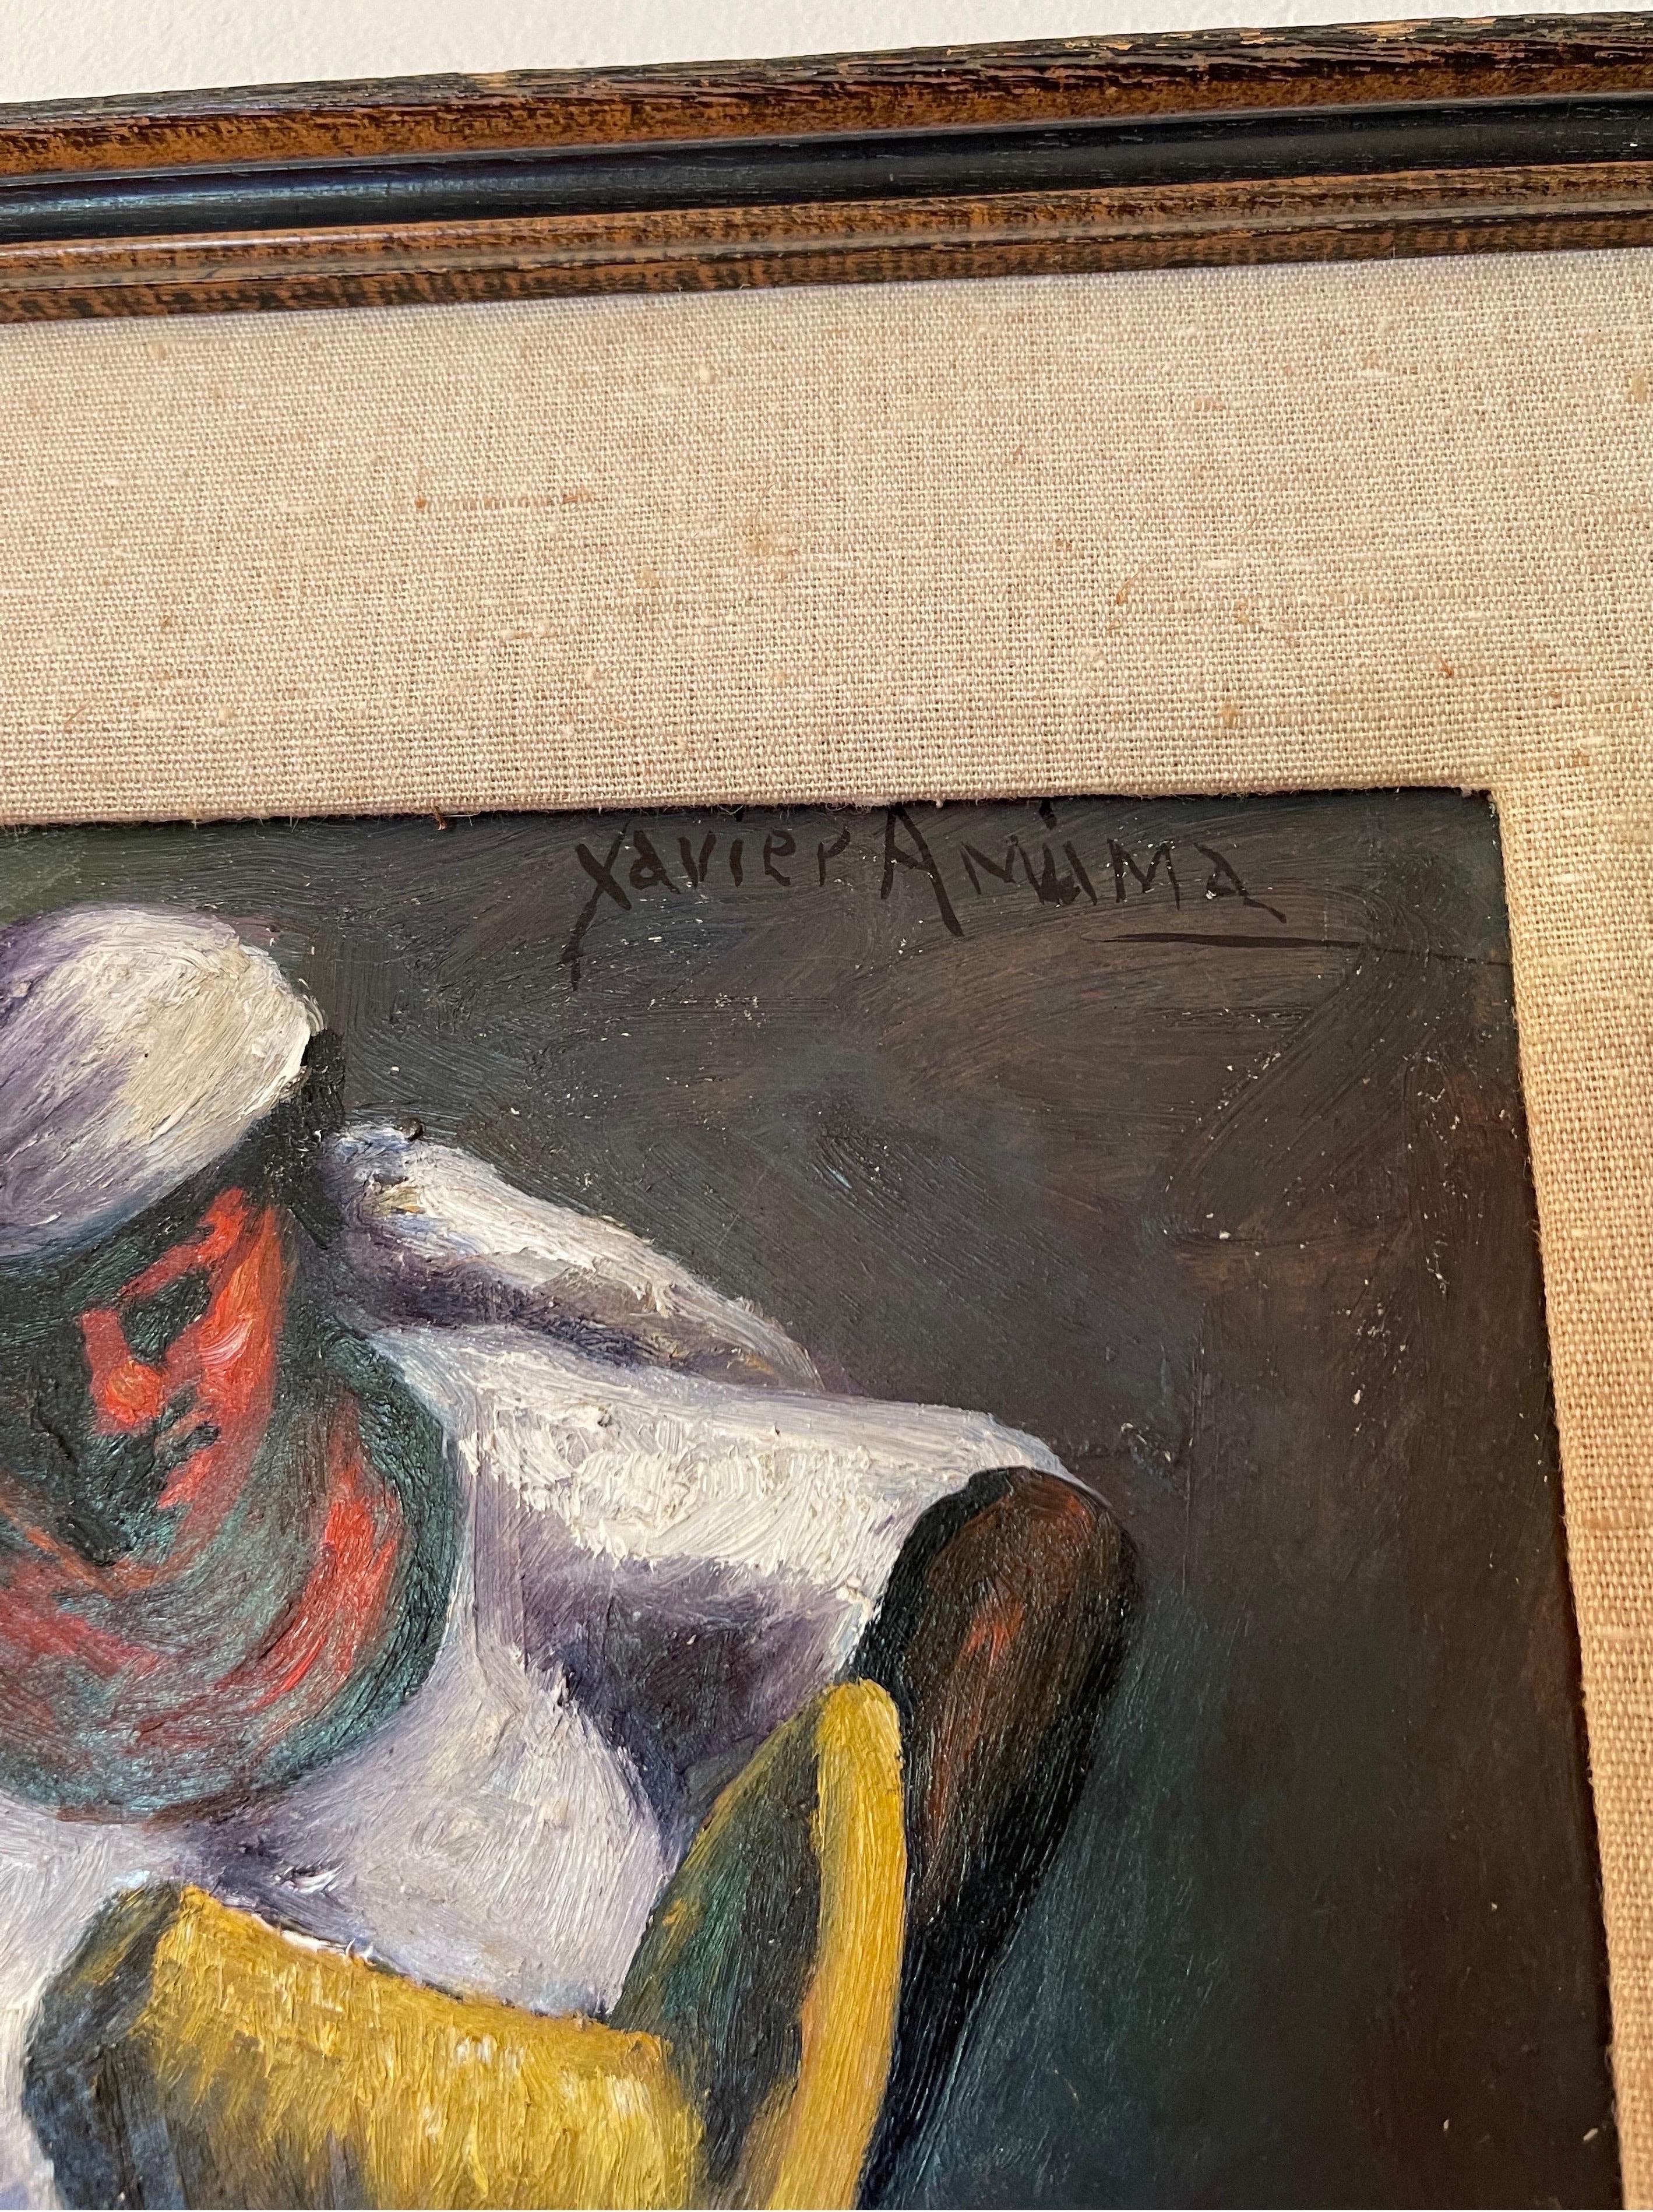 1956 Haiti Drummers and Dancers by Xaviar Amiana Painting In Good Condition For Sale In Stamford, CT